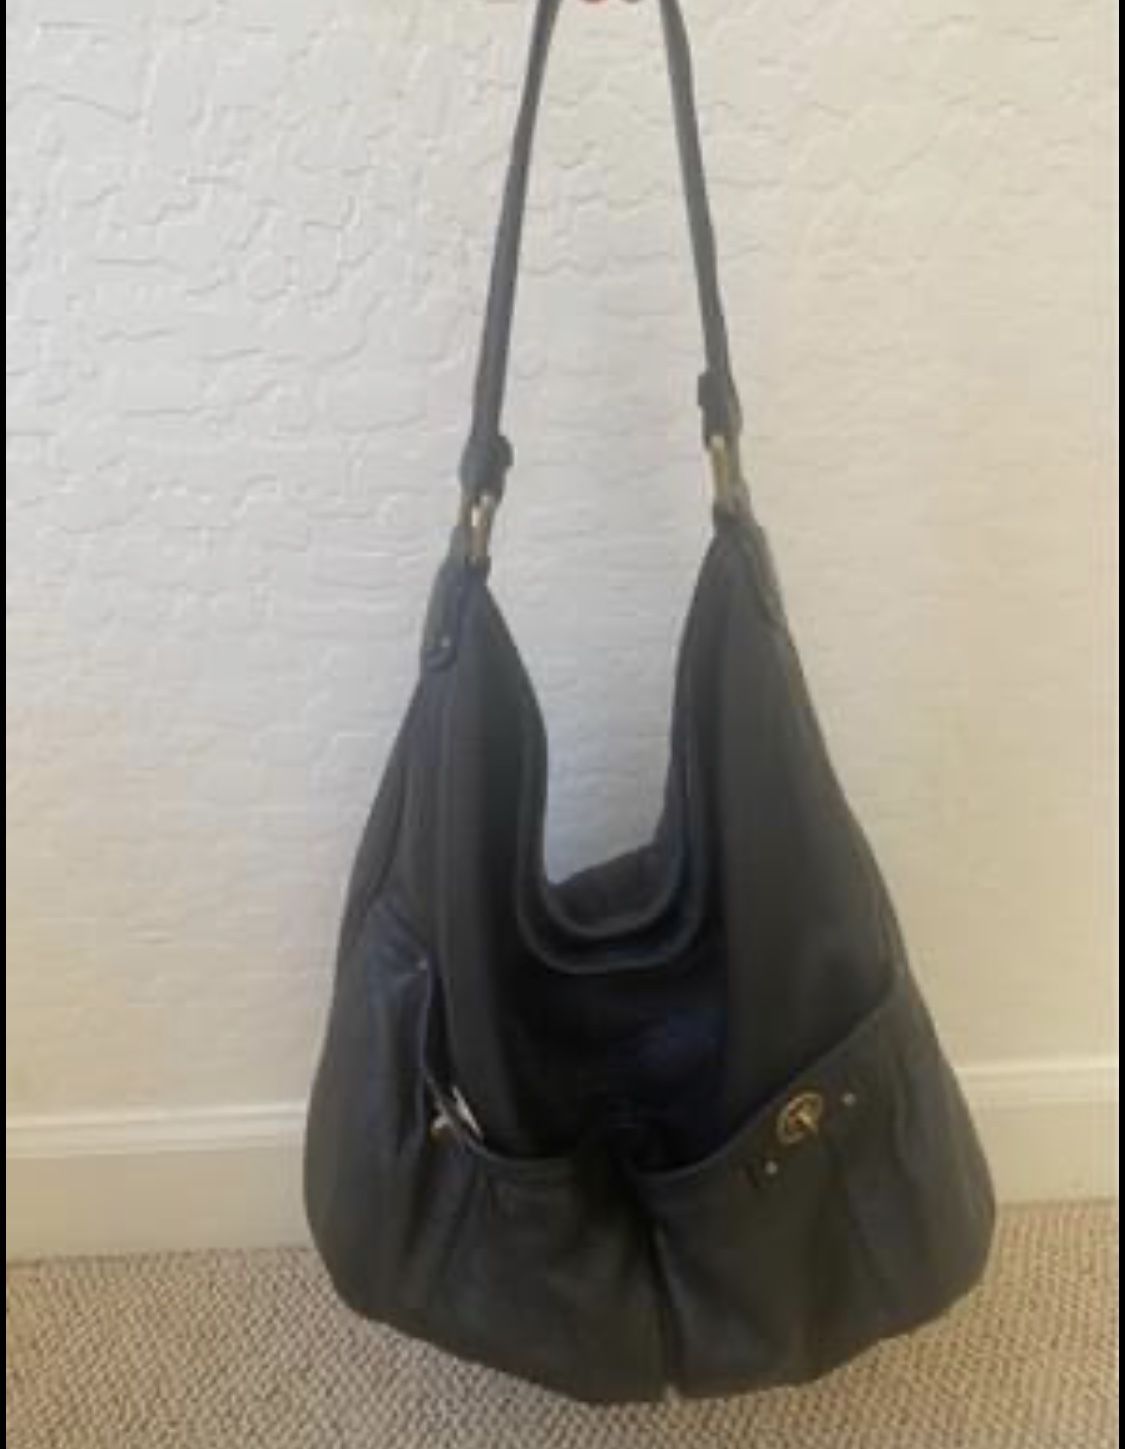 Marc By Marc Jacobs Hobo Bag